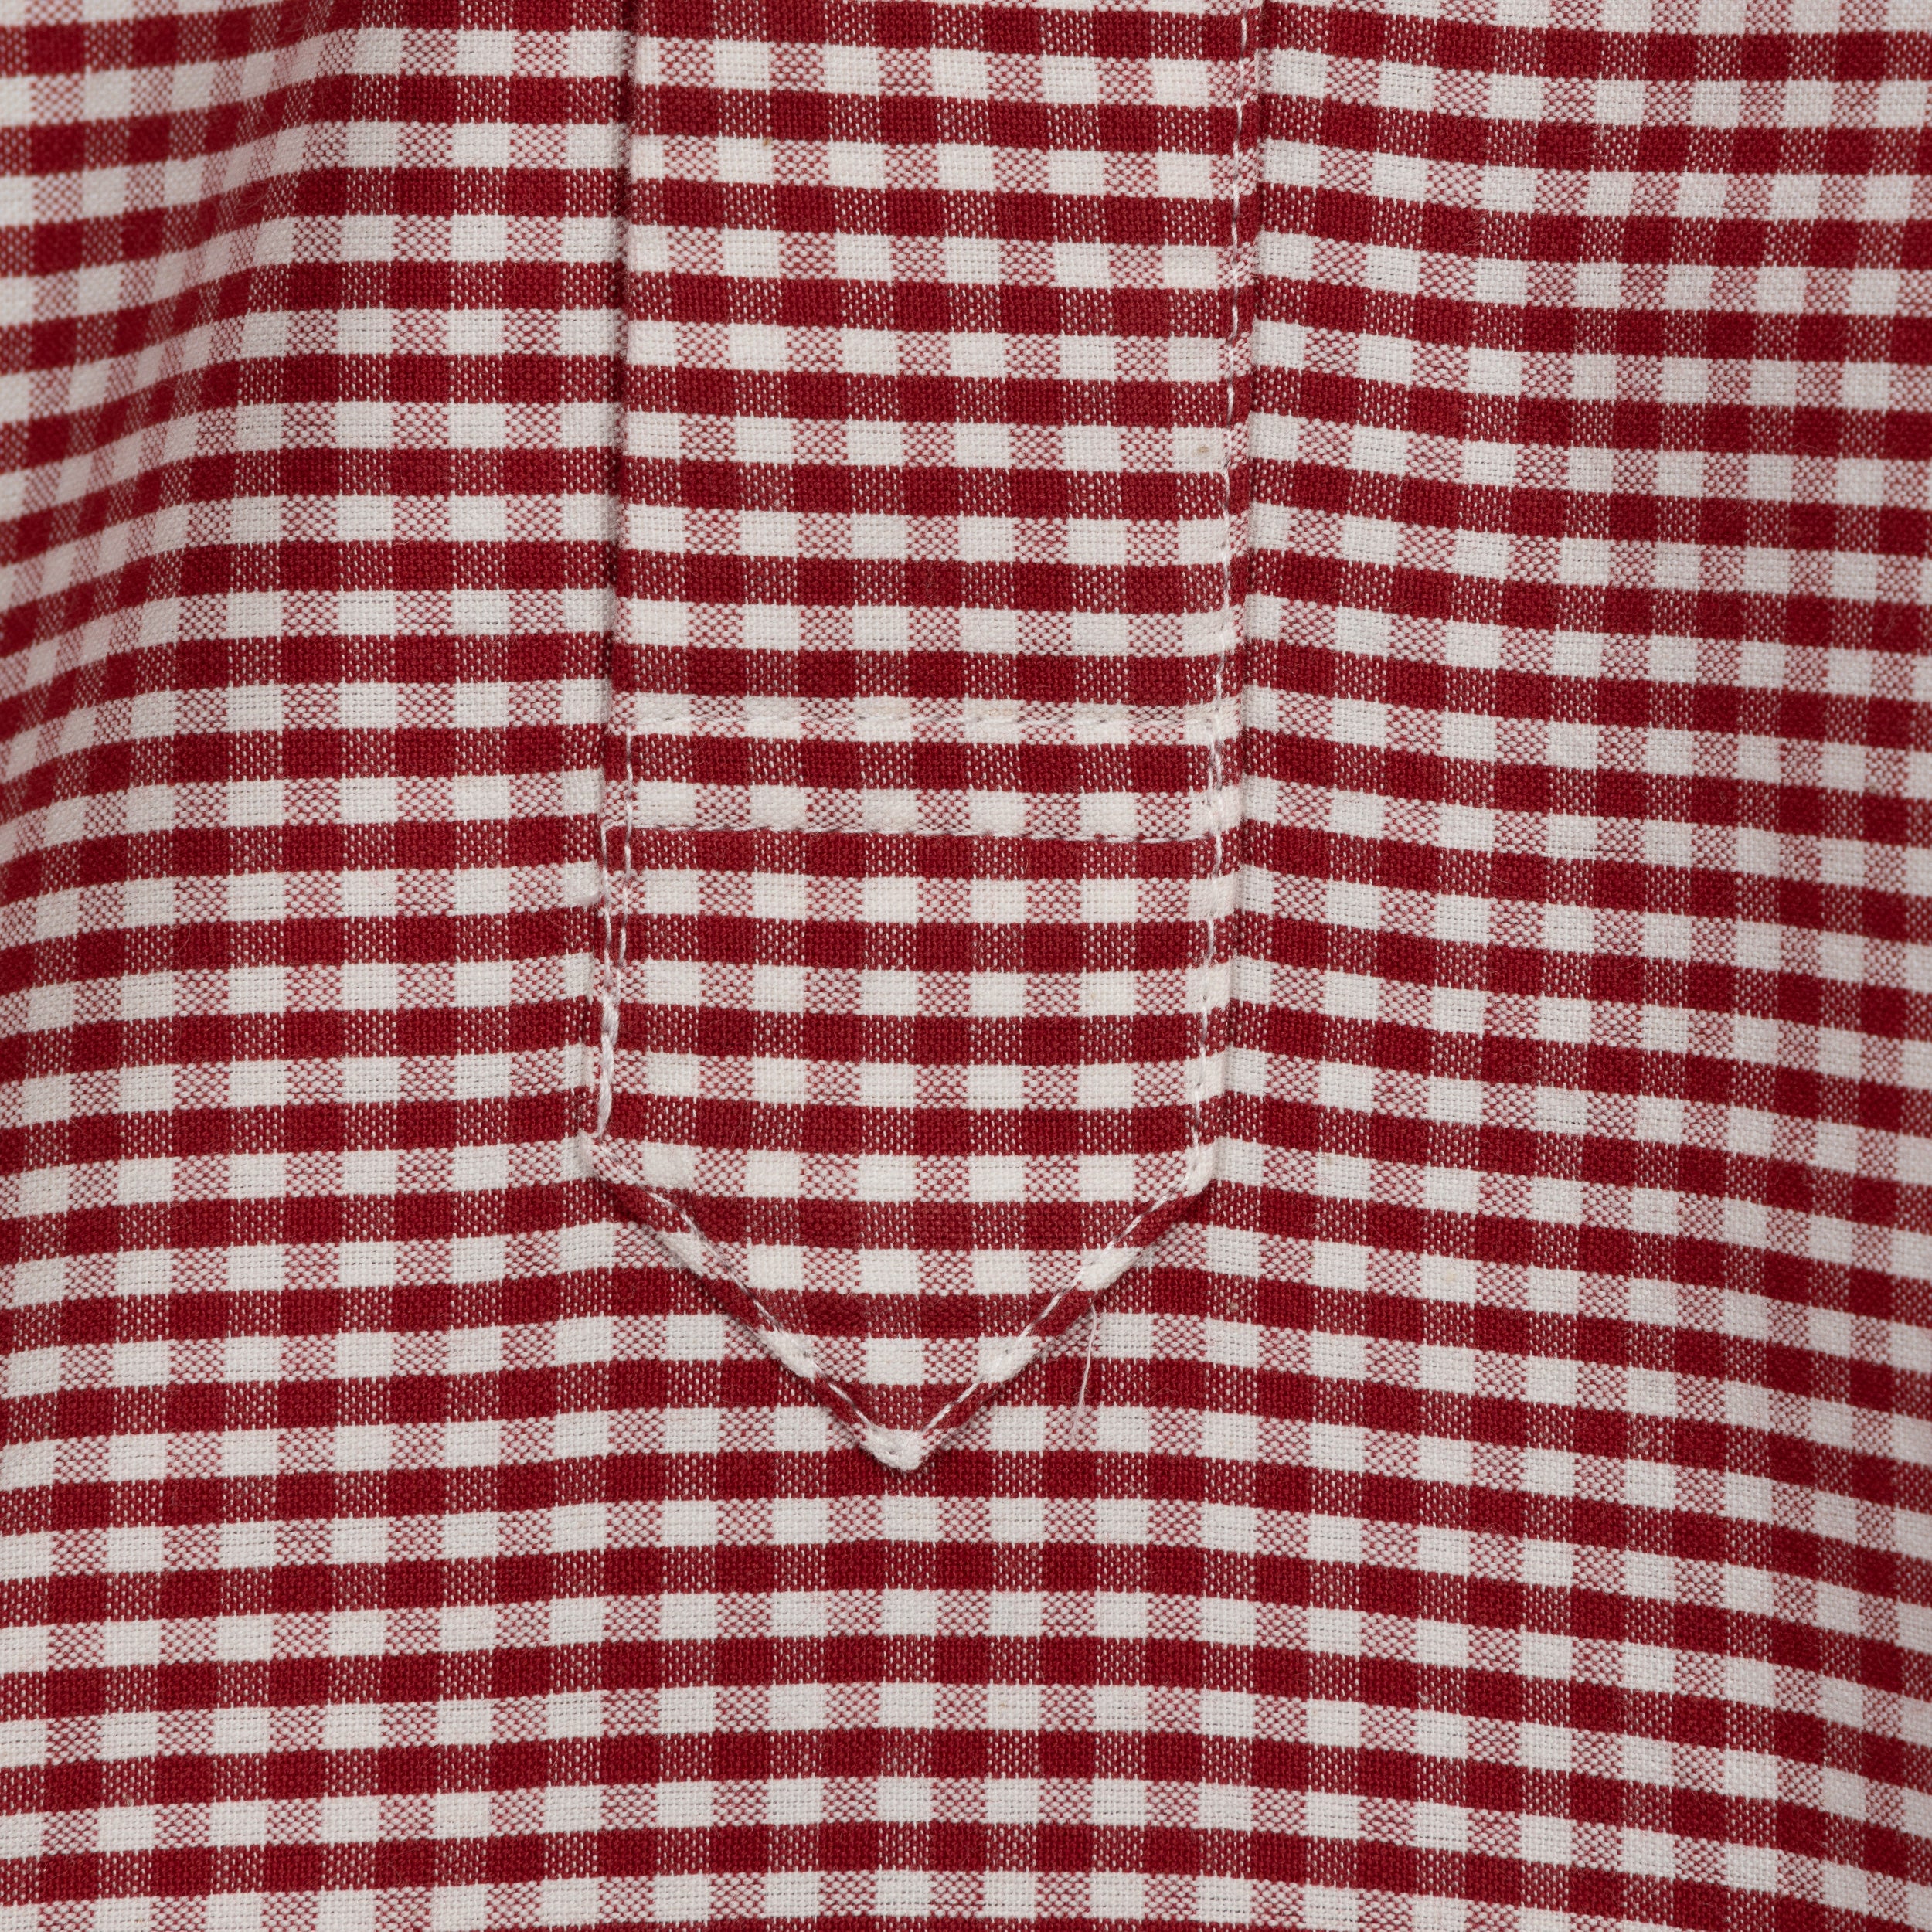 Carrier Company Collarless Work Shirt in Gingham Red Cotton